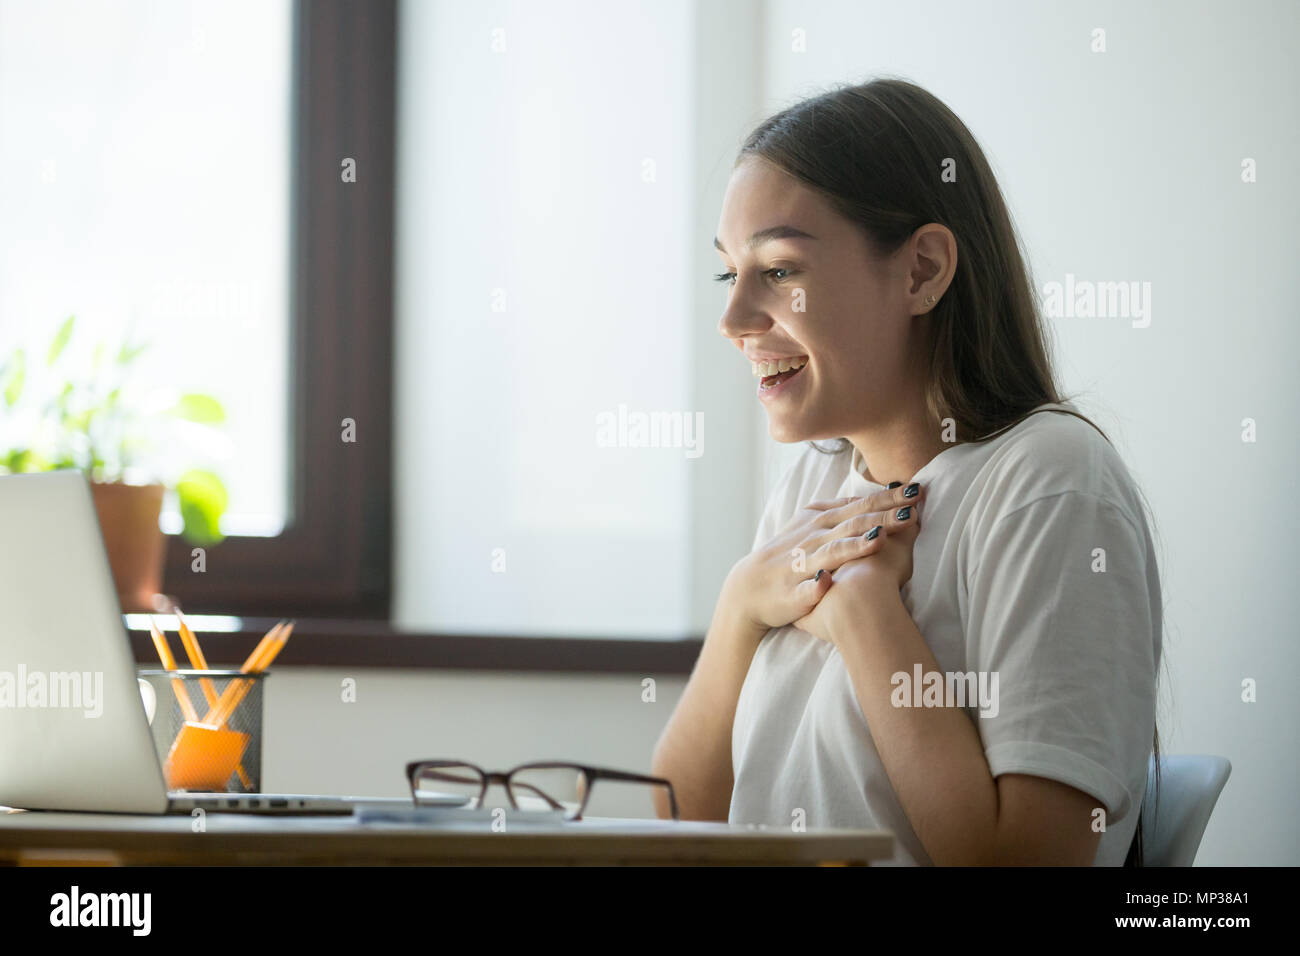 Excited female happy with online win Stock Photo